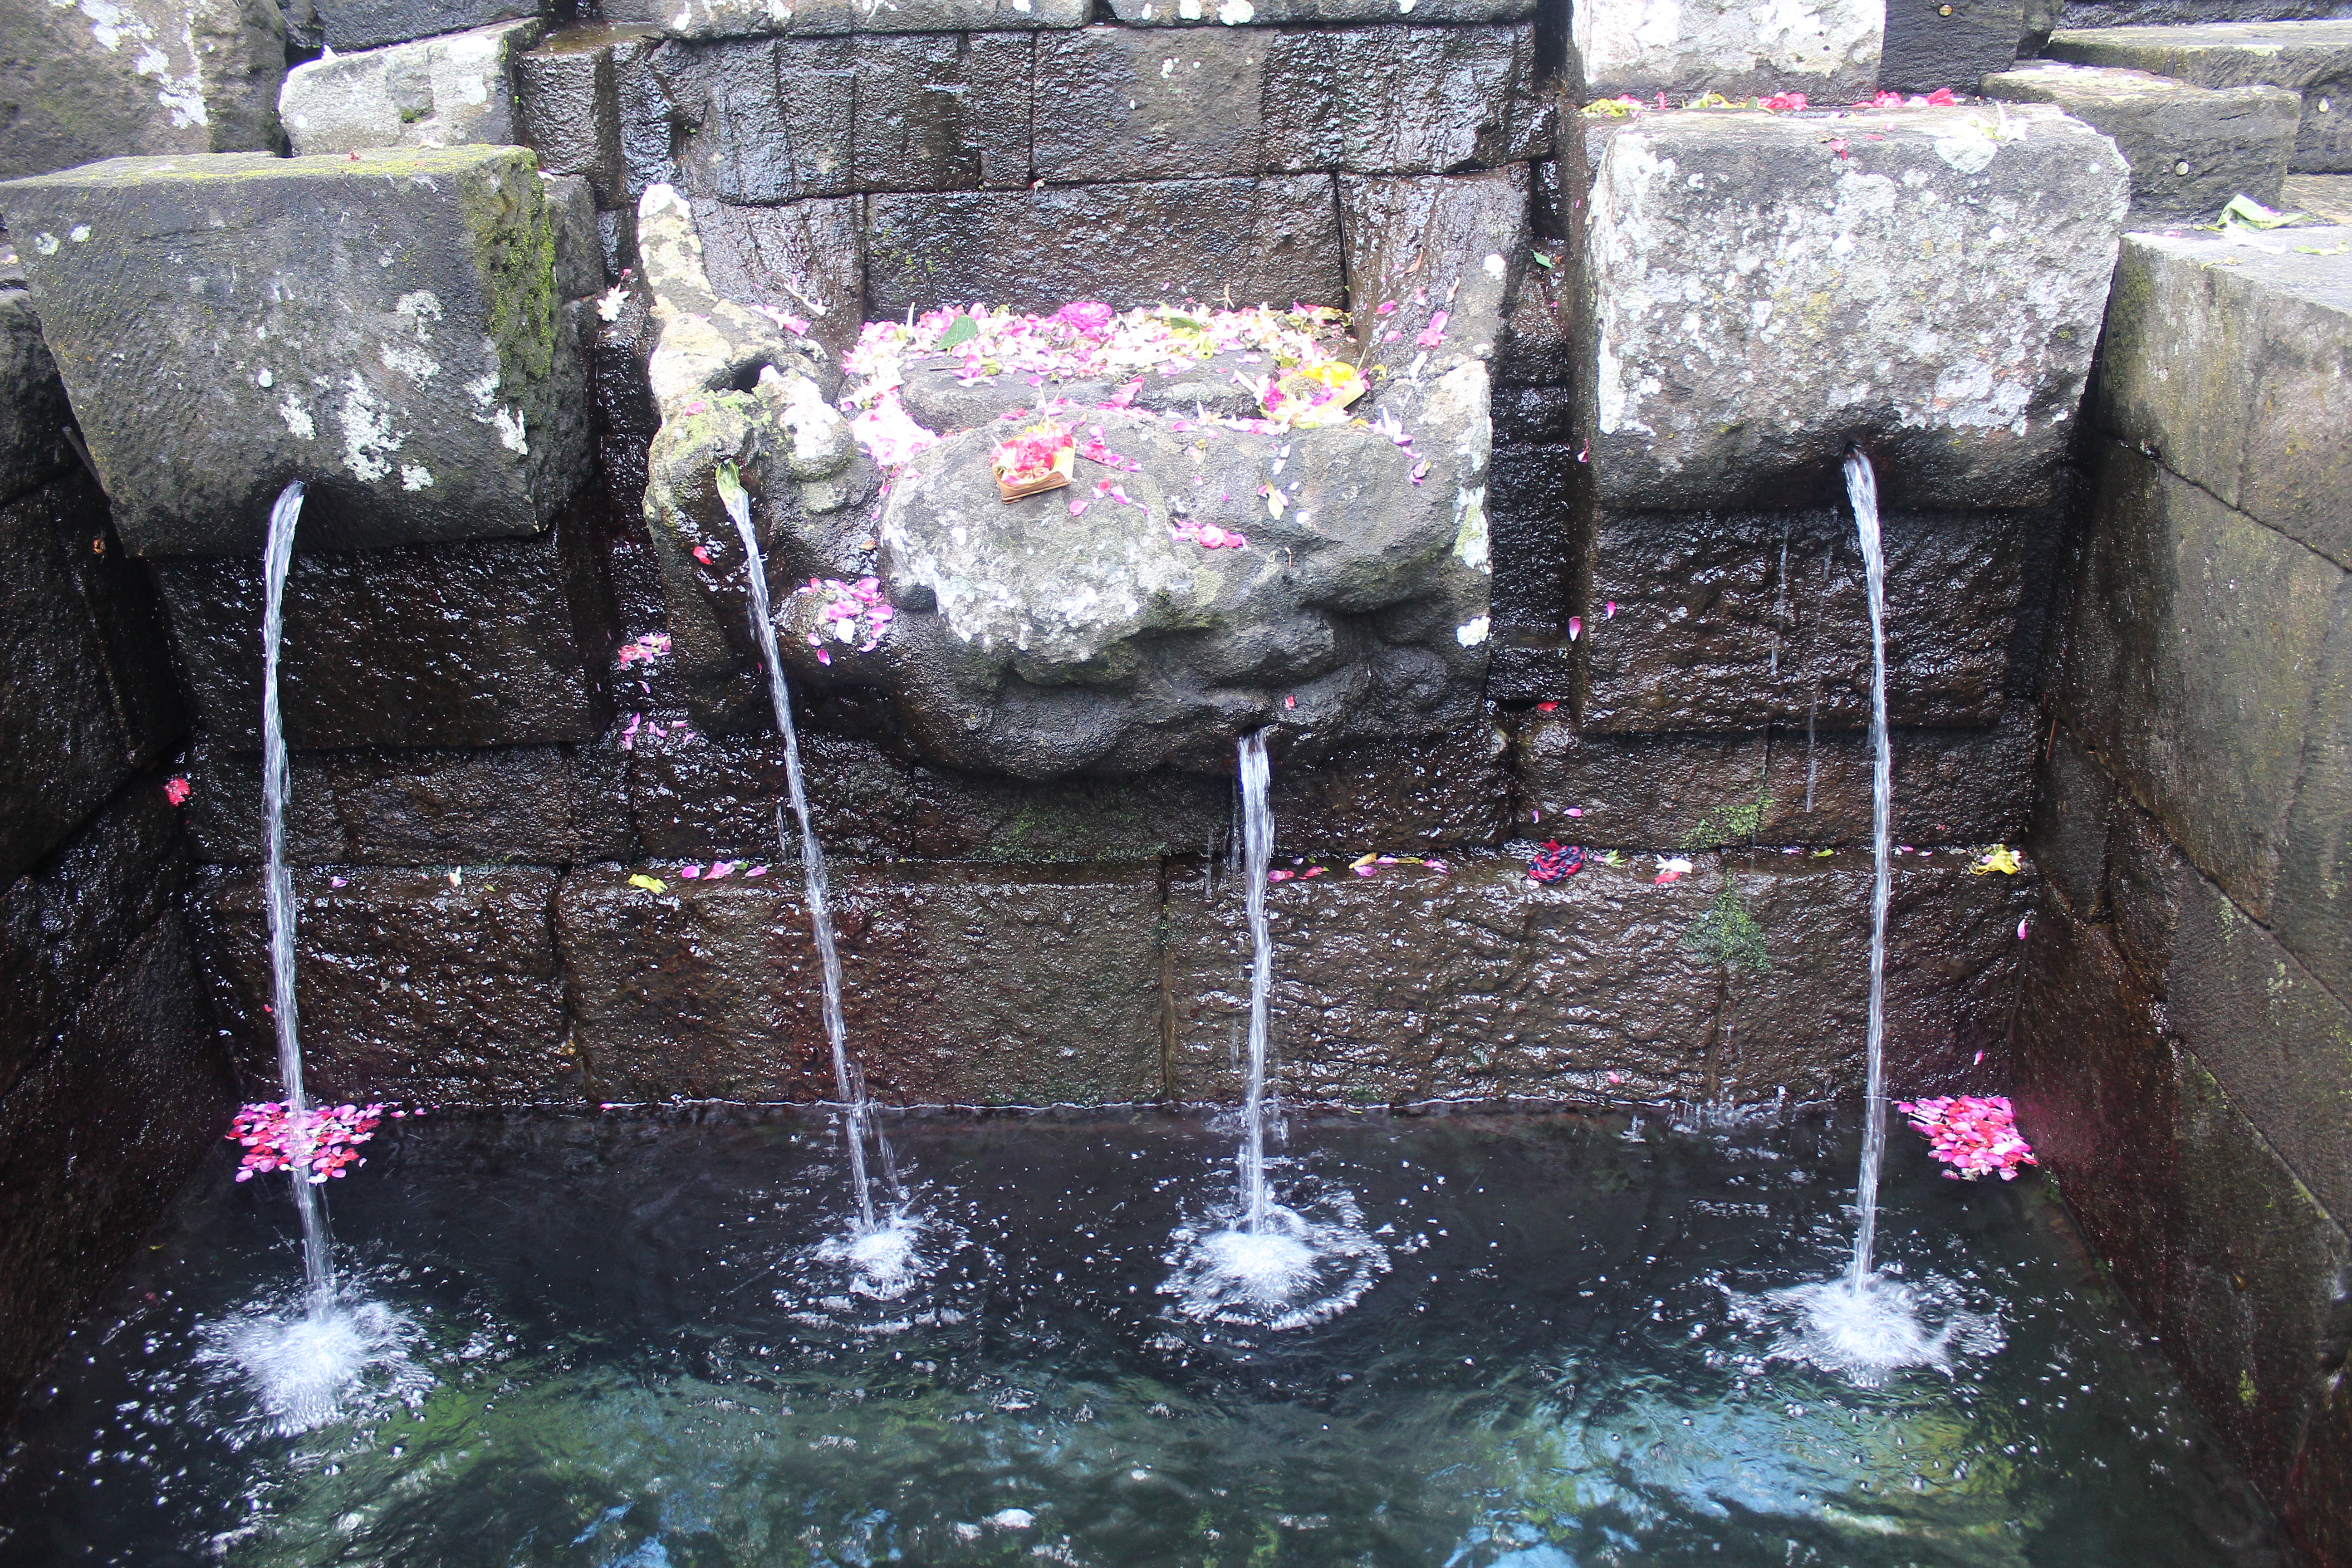 Four spouts from an altar streaming into a pool, with pink flowers in the water